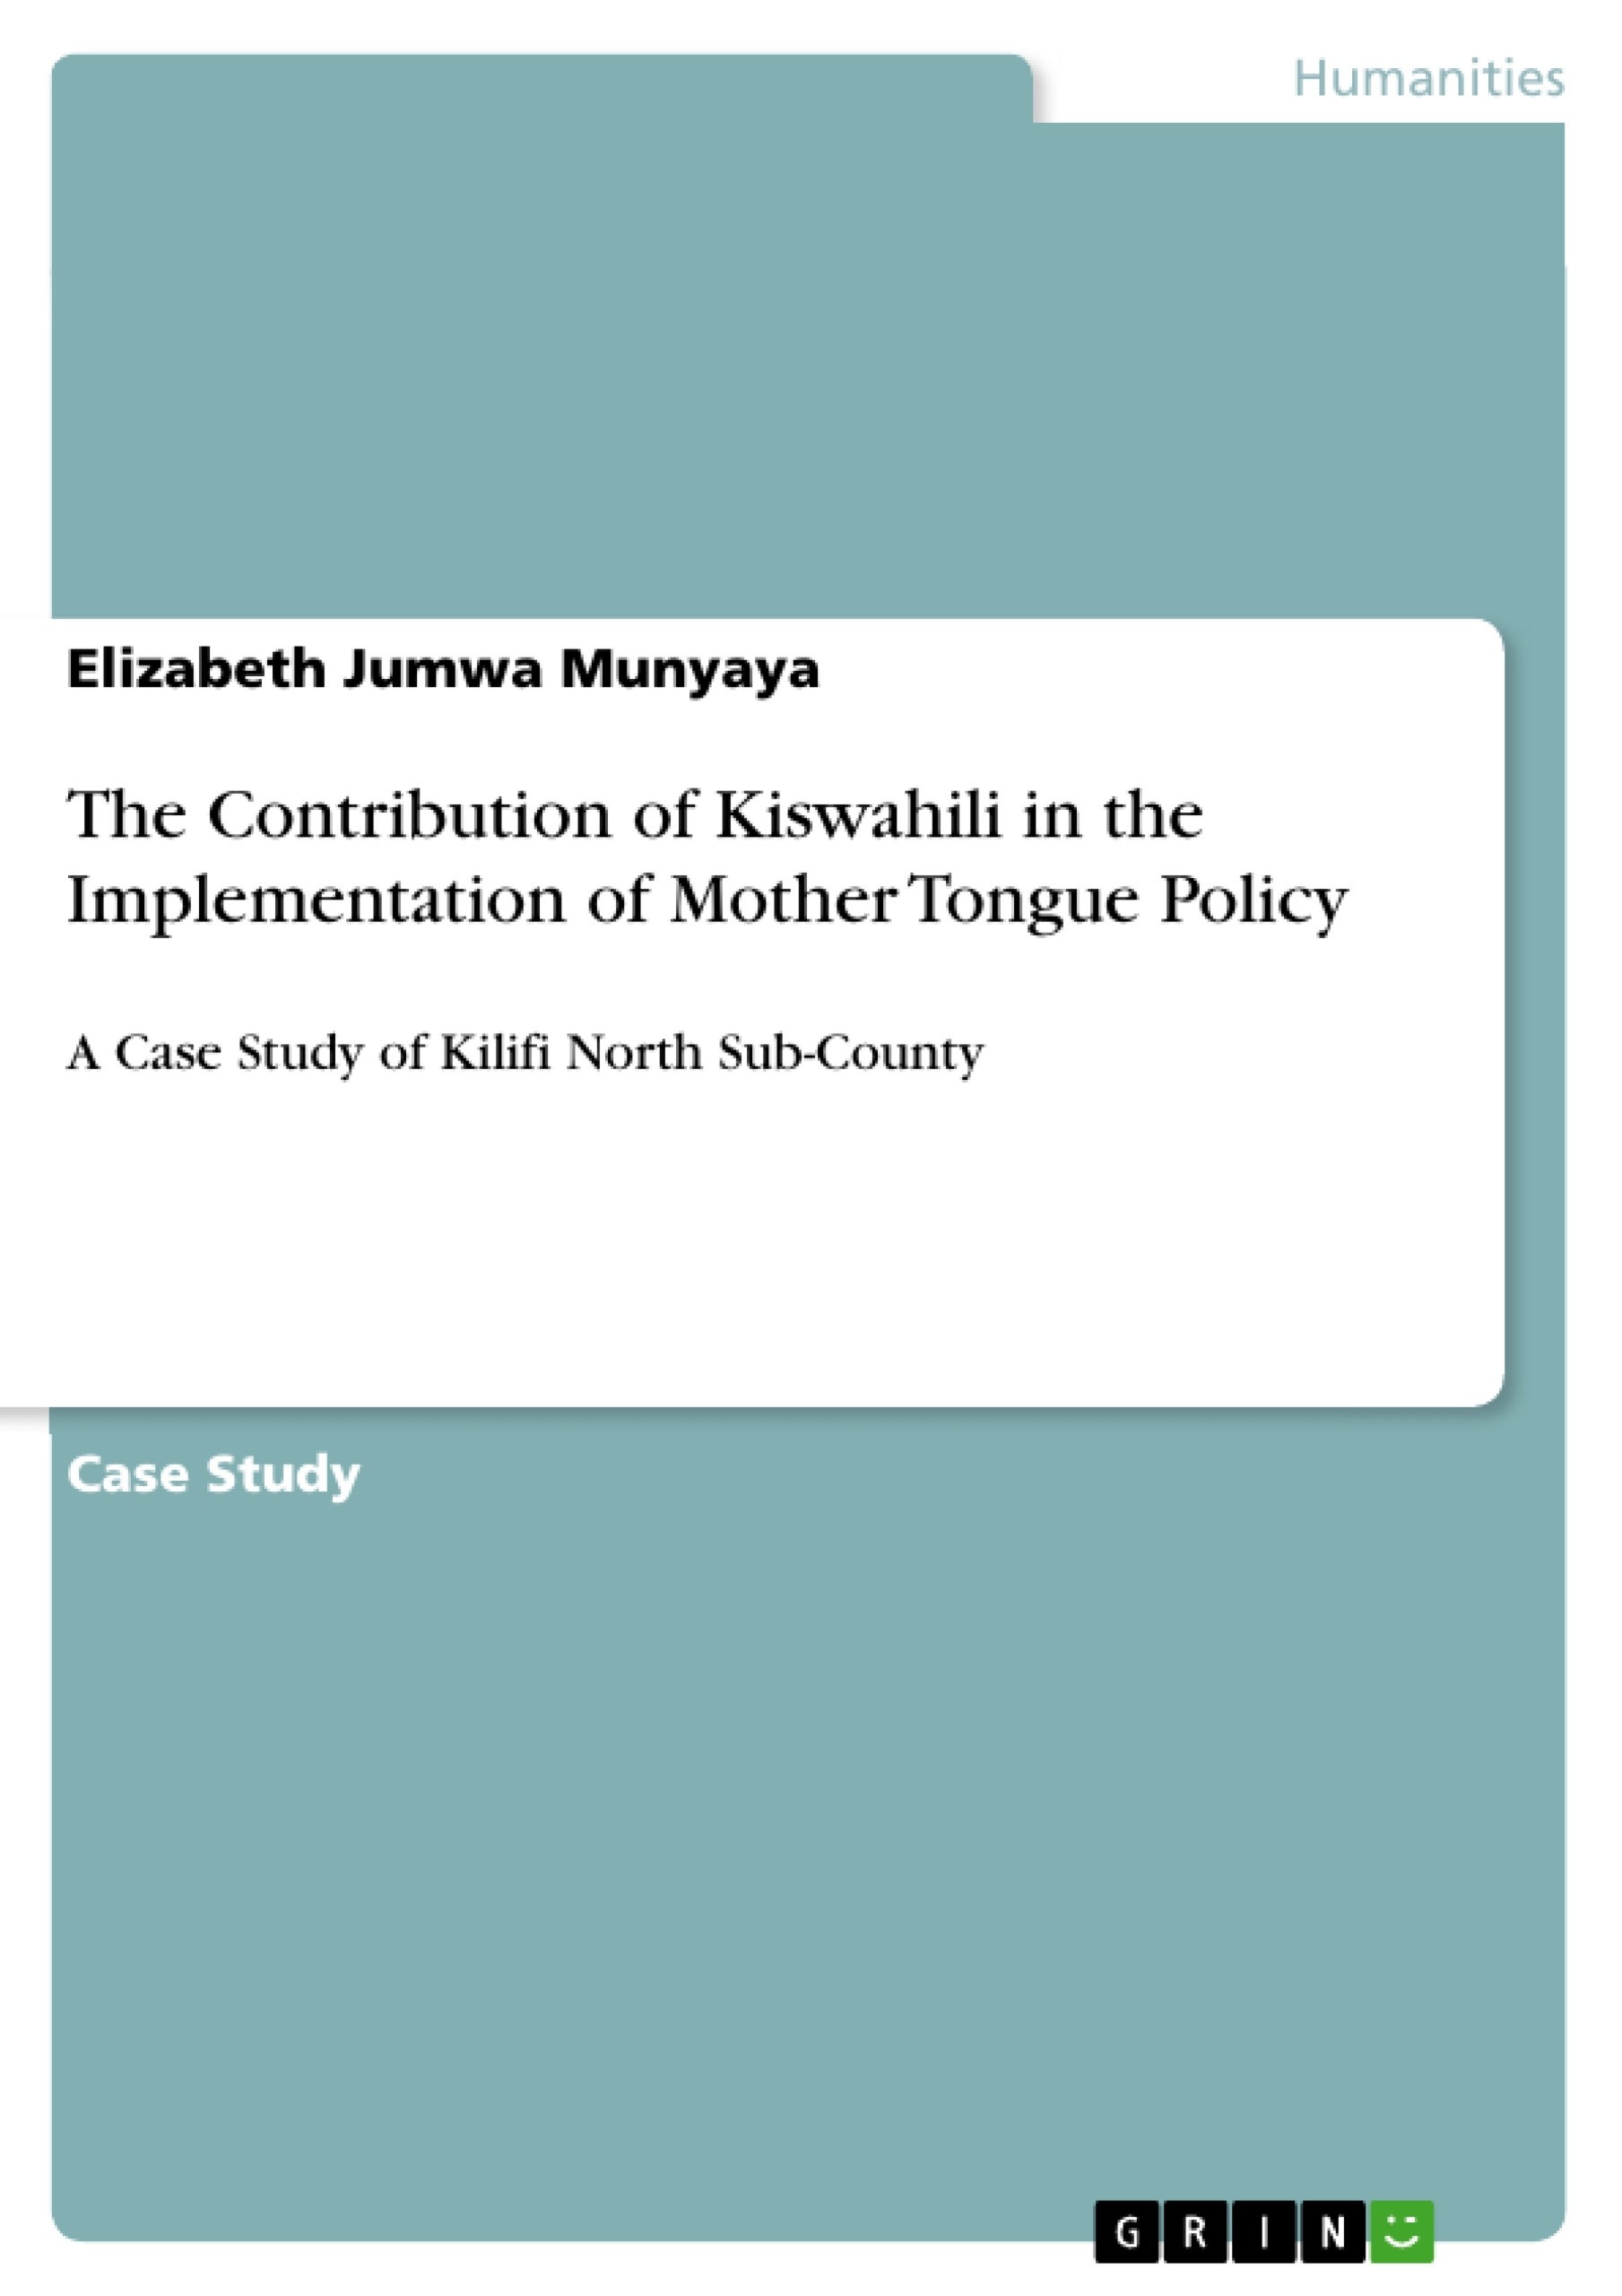 Title: The Contribution of Kiswahili in the Implementation of Mother Tongue Policy